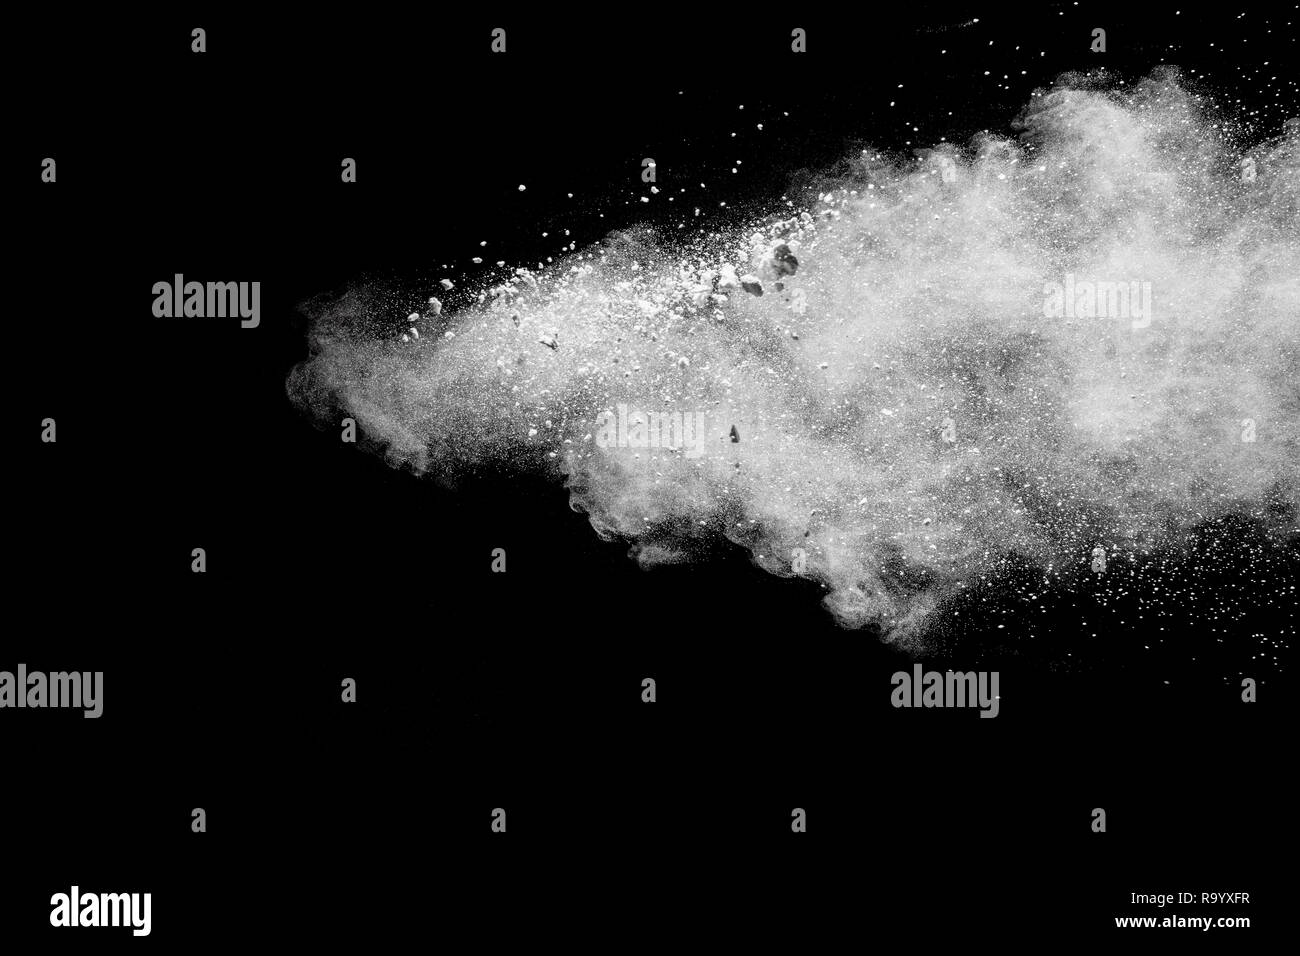 Bizarre forms of  white powder explosion on white background.Launched white dust particles splash on dark background. Stock Photo